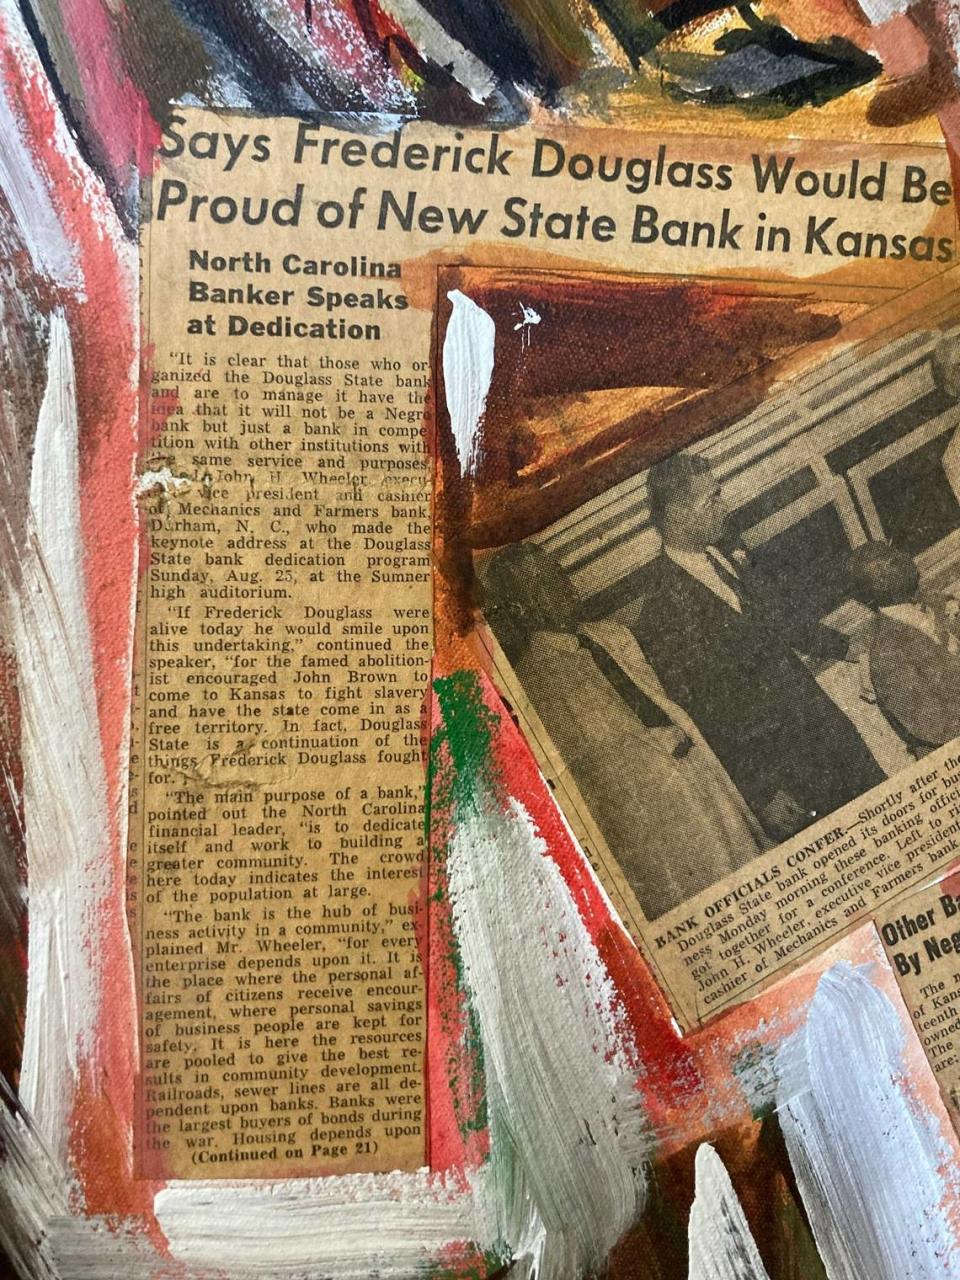 A news story embedded into the 1974 mural painted by Hank Smith says Douglass State Bank, the first Black-owned bank in Kansas, evoked the spirit of Frederick Douglass.